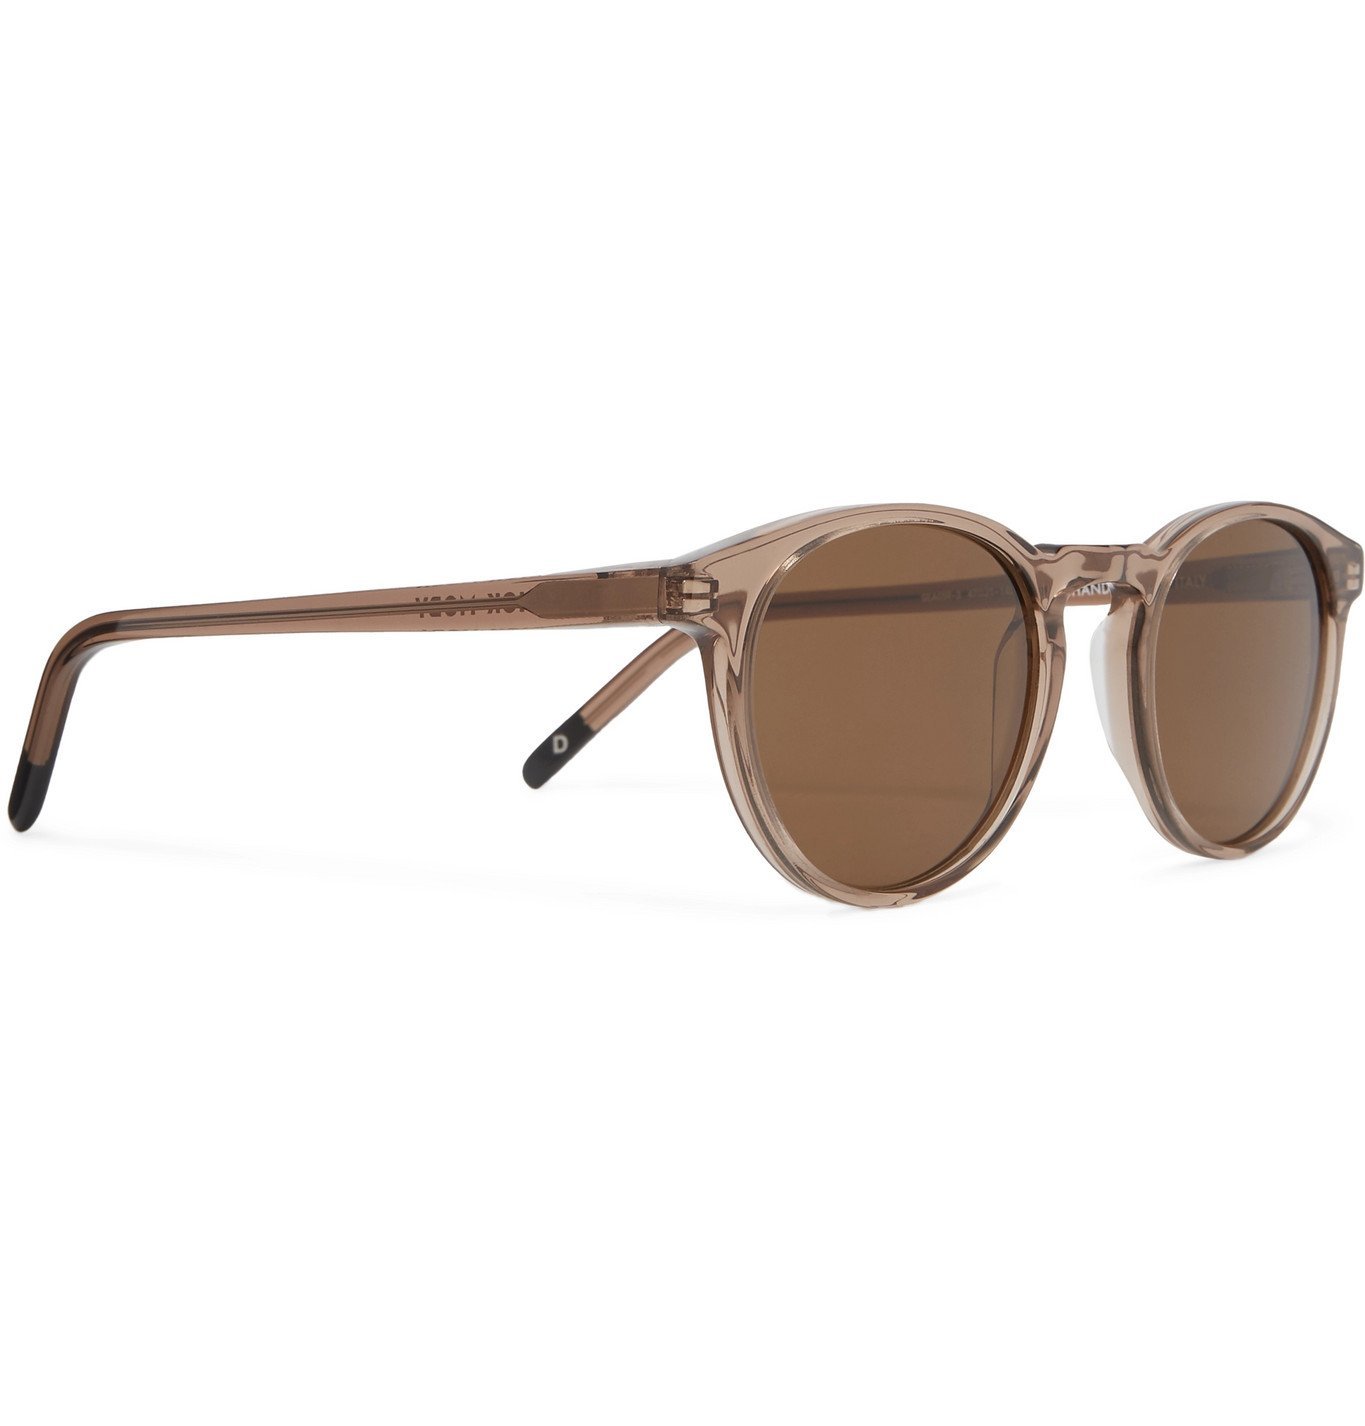 Dick Moby - Seattle Round-Frame Acetate Sunglasses - Brown Dick Moby